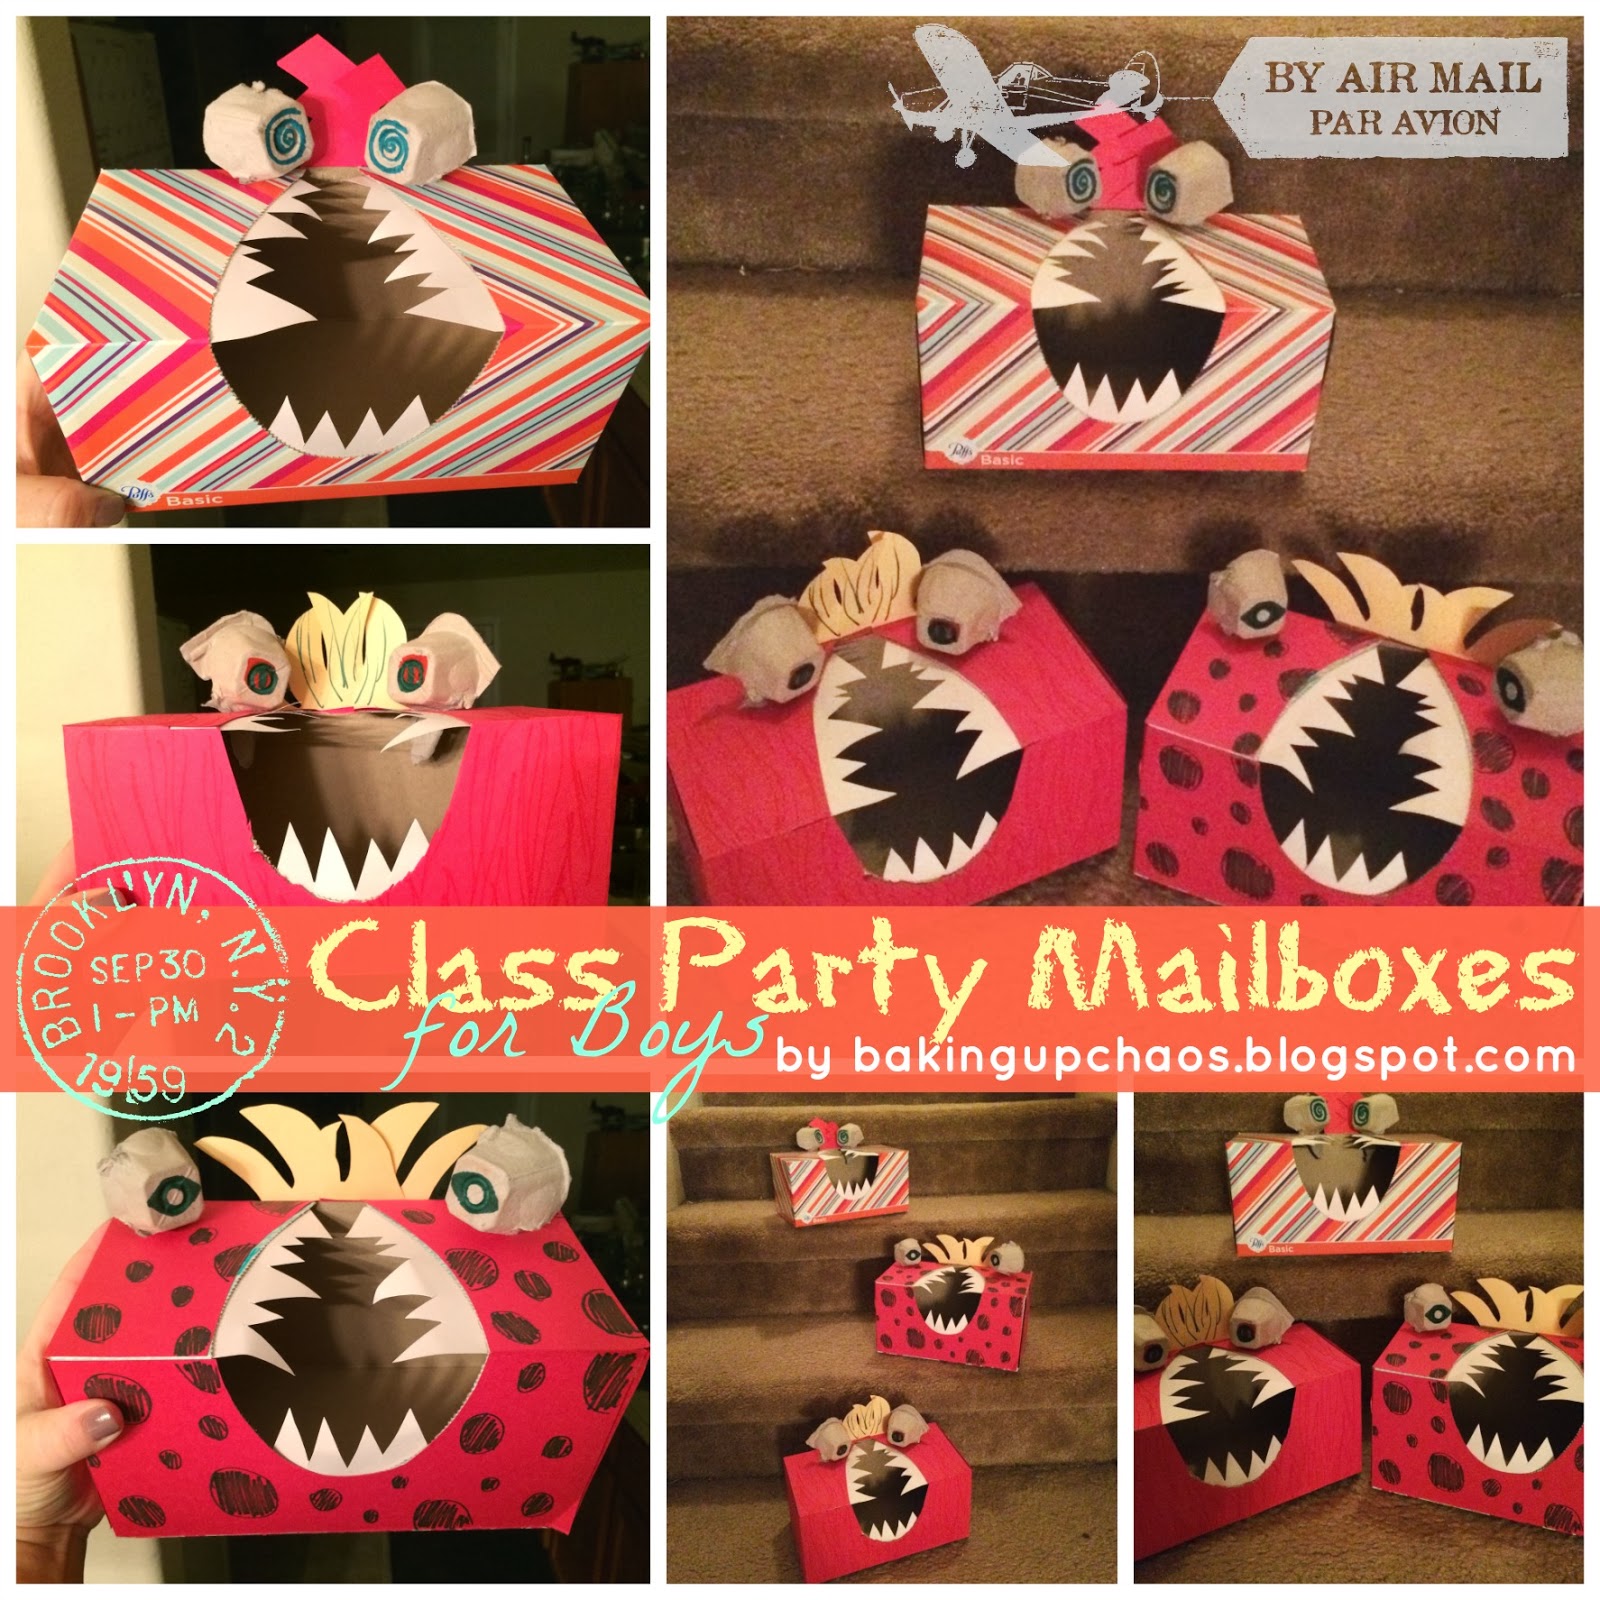 Class party mailboxes for boys by BakingUpChaos